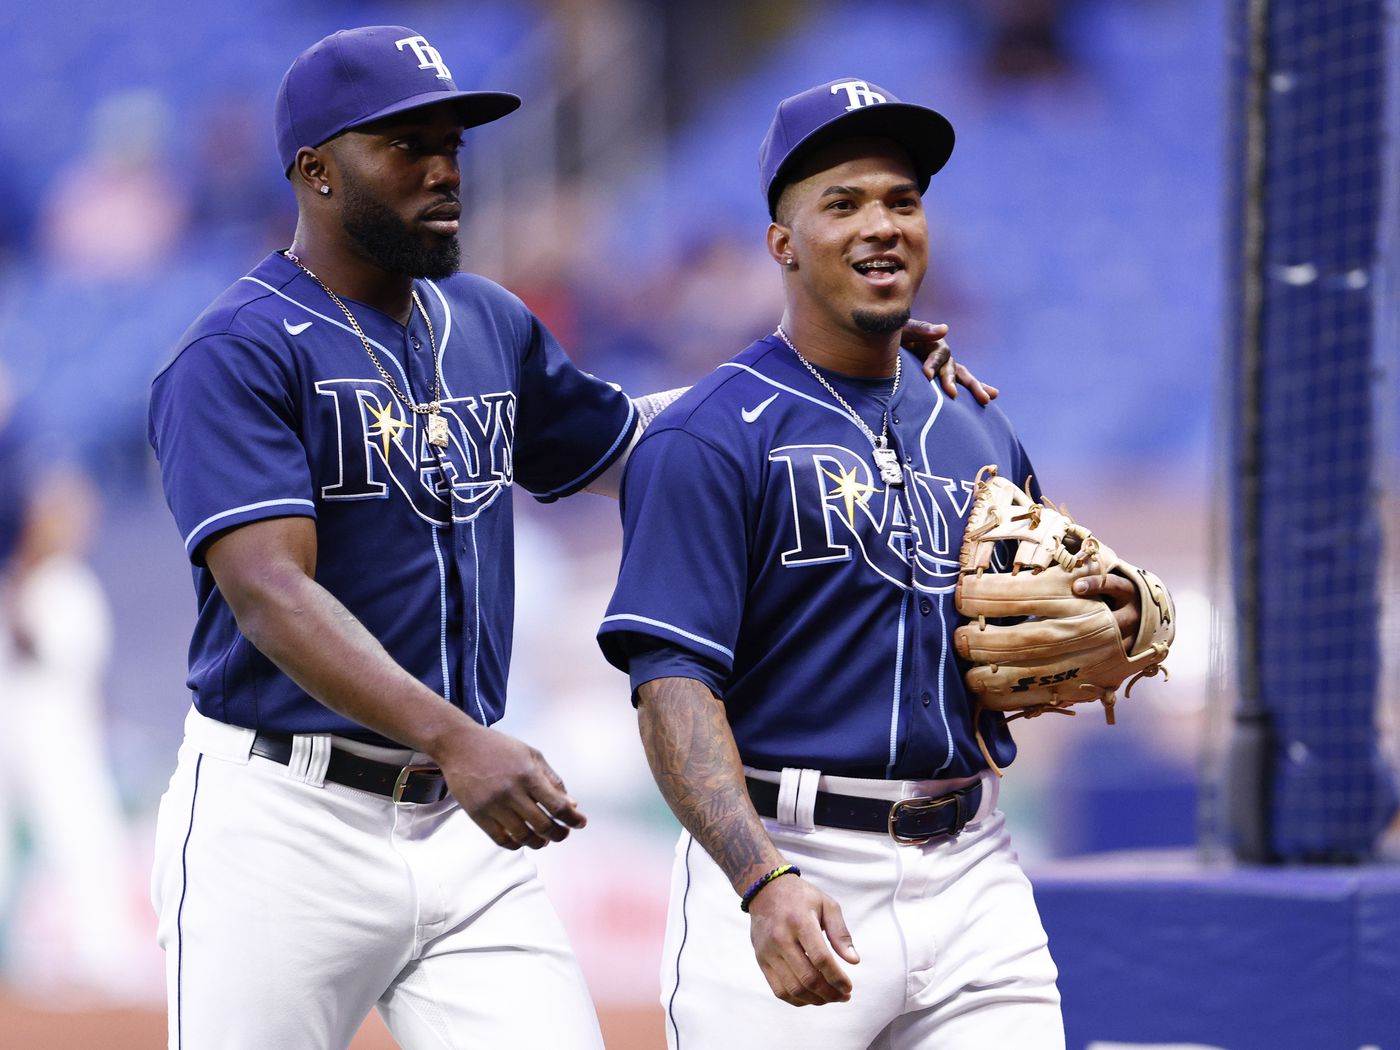 Can the defending AL East champs reclaim their crown the Box Score